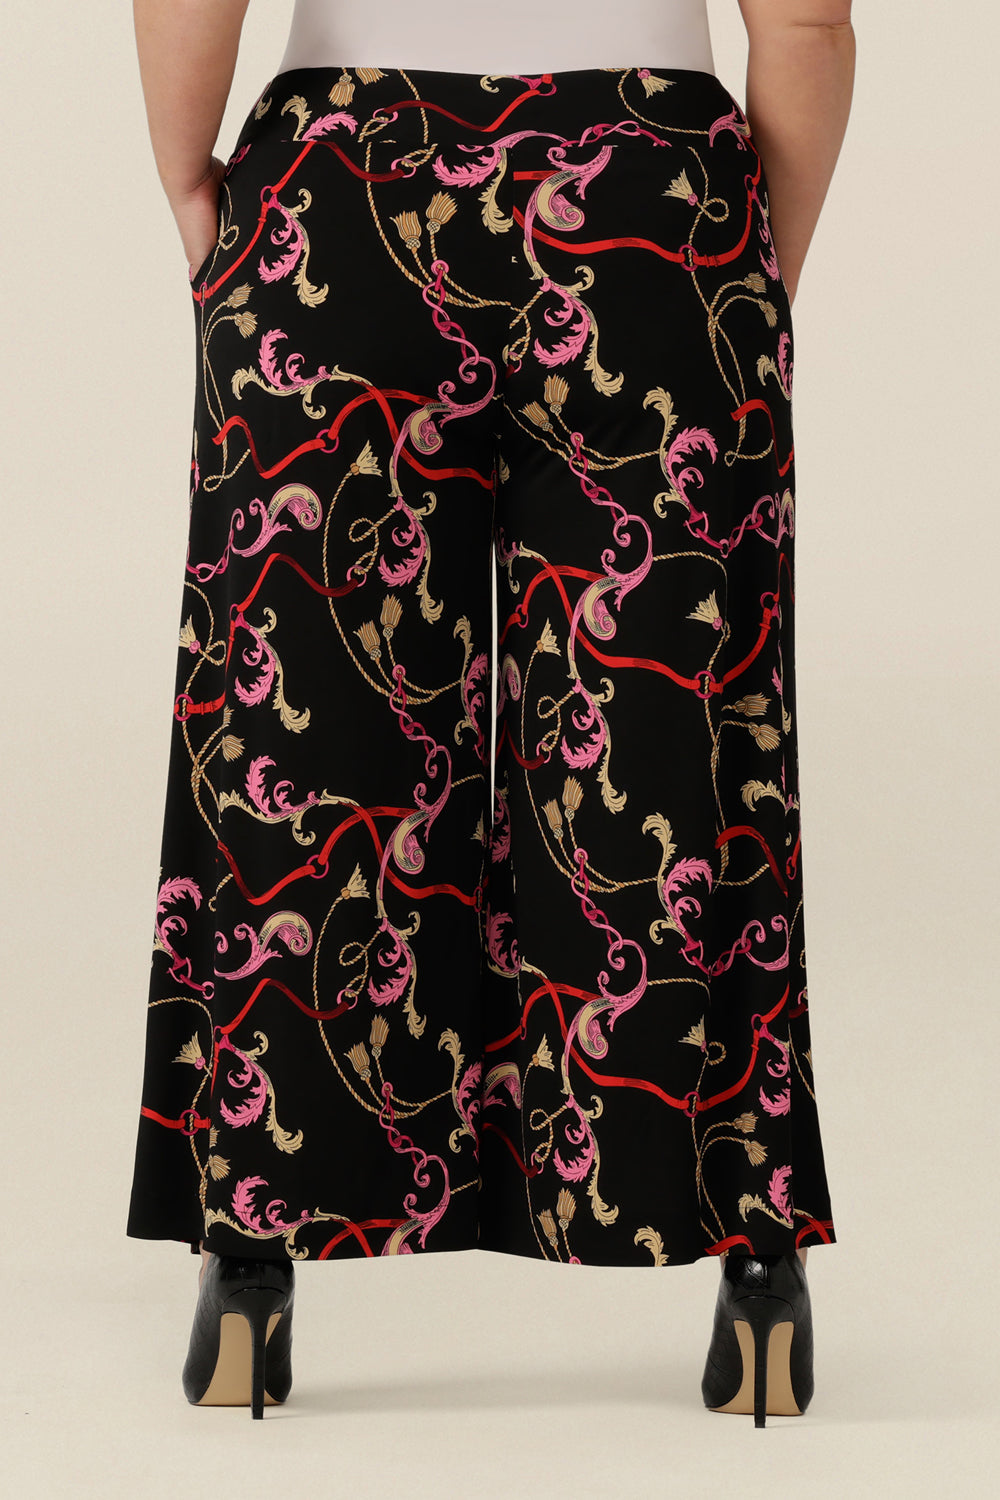 Back view of wide leg pull-on pants in rococo Tassel print stretch jersey. Comfortable pants for work and casual wear, these cropped trousers are made in Australia by women's clothing brand, Leina & Fleur.